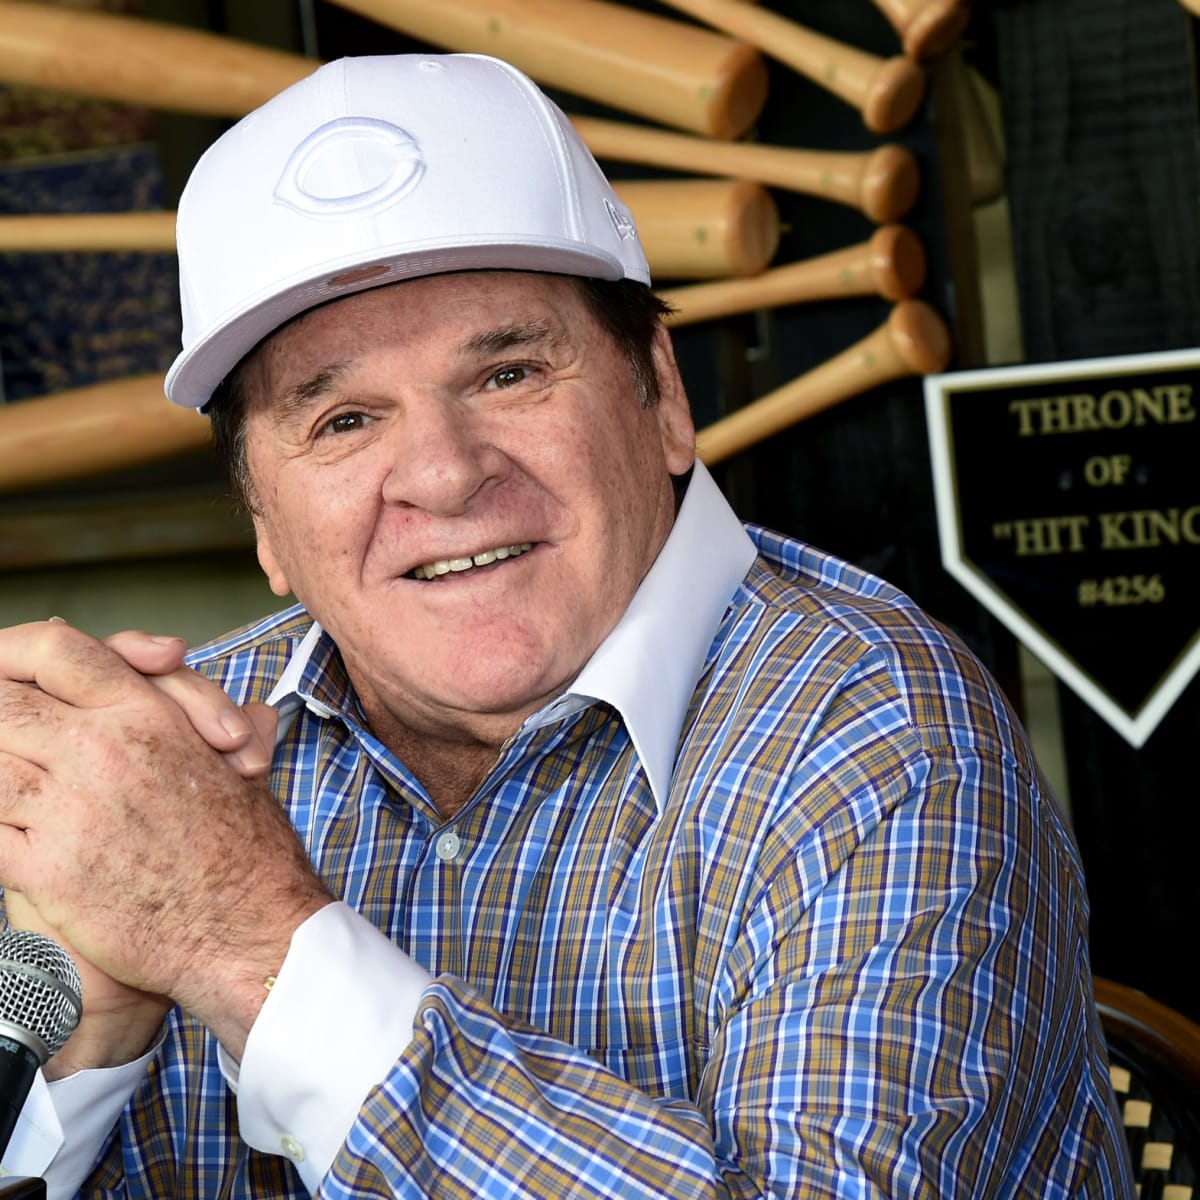 Pete Rose bet on games as a player, report says – Orange County Register